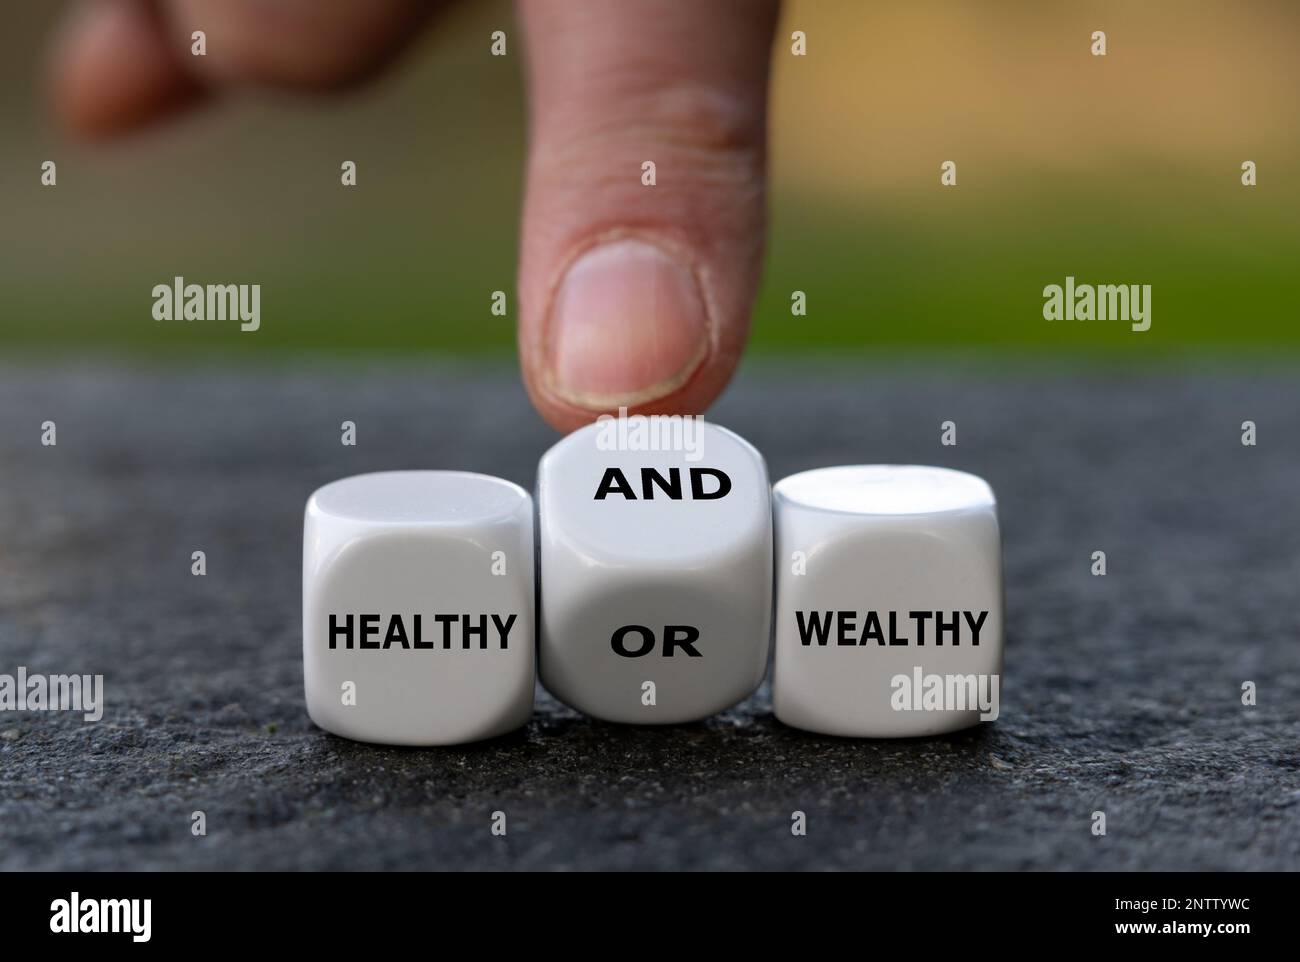 Hand turns dice and changes the expression 'healthy or wealthy' to 'healthy and wealthy'. Stock Photo